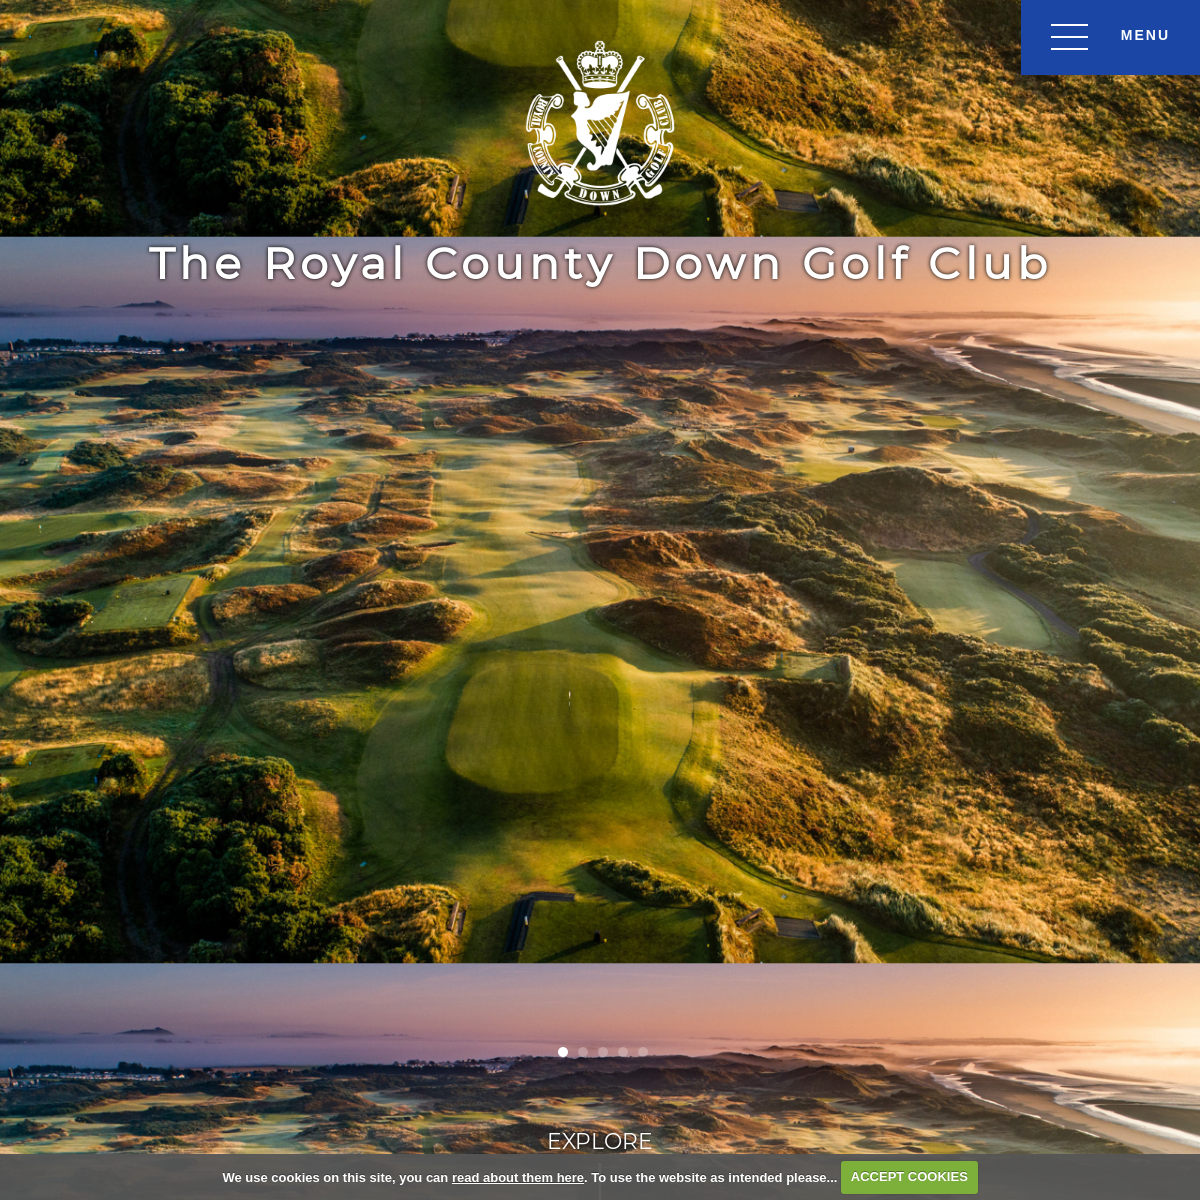 A complete backup of royalcountydown.org